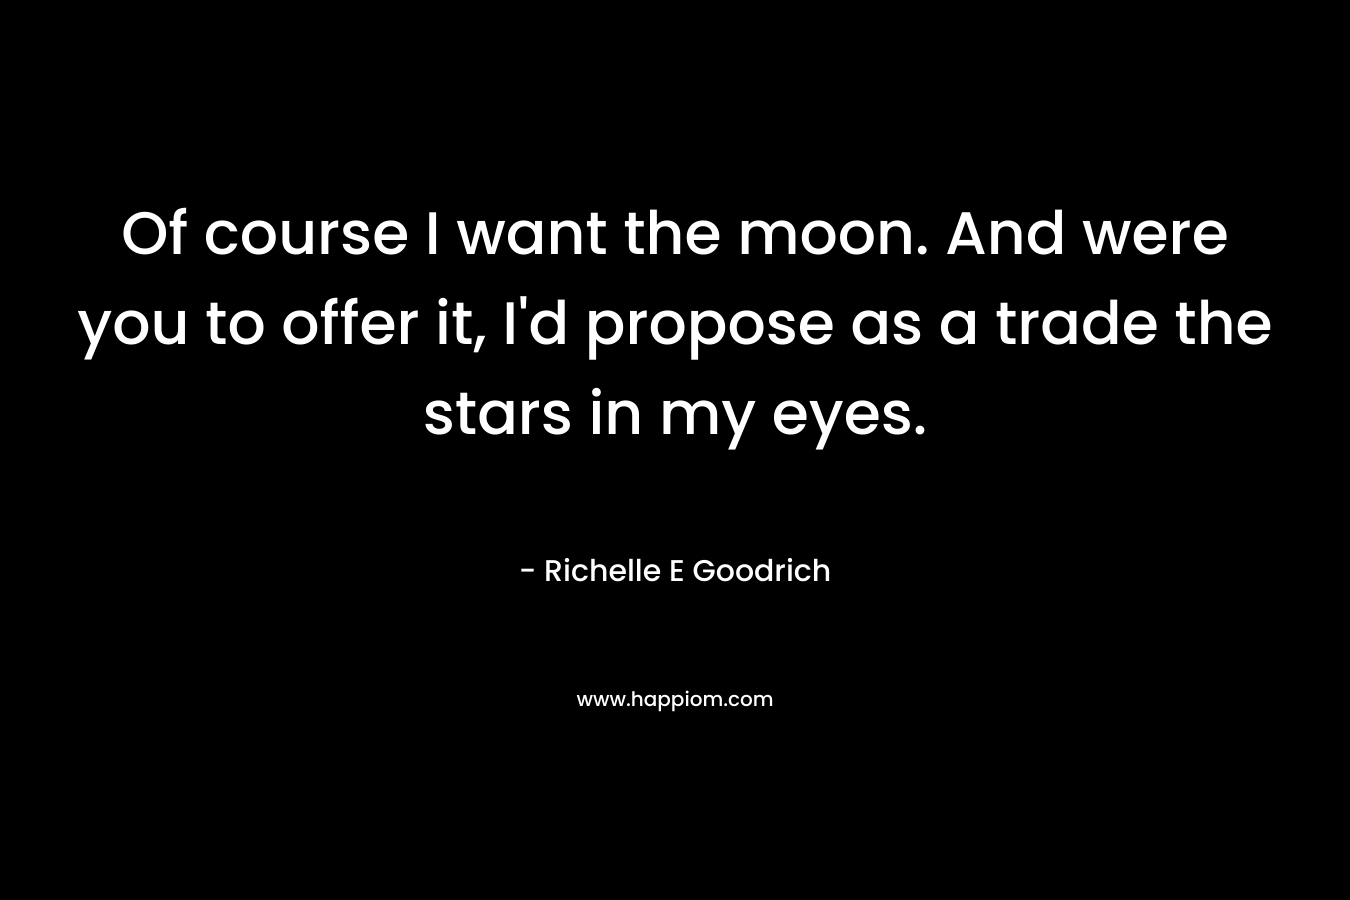 Of course I want the moon. And were you to offer it, I'd propose as a trade the stars in my eyes.